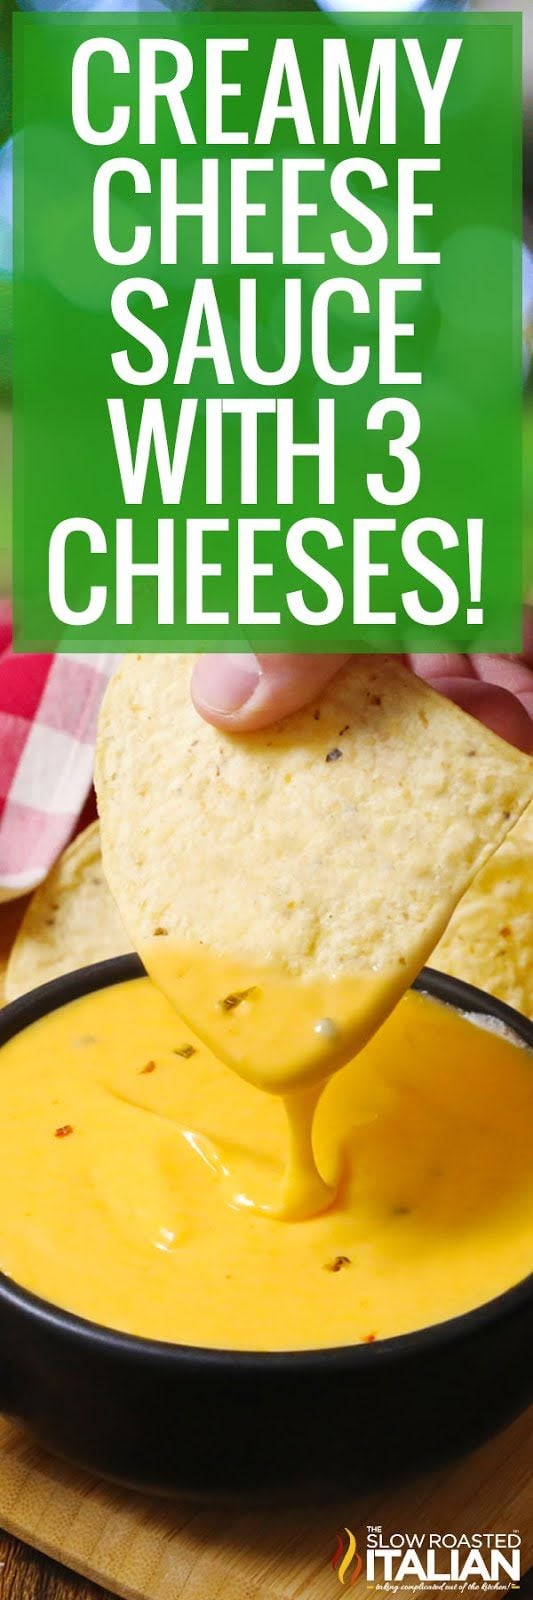 Creamy Cheese Sauce Recipe with 3 Cheeses